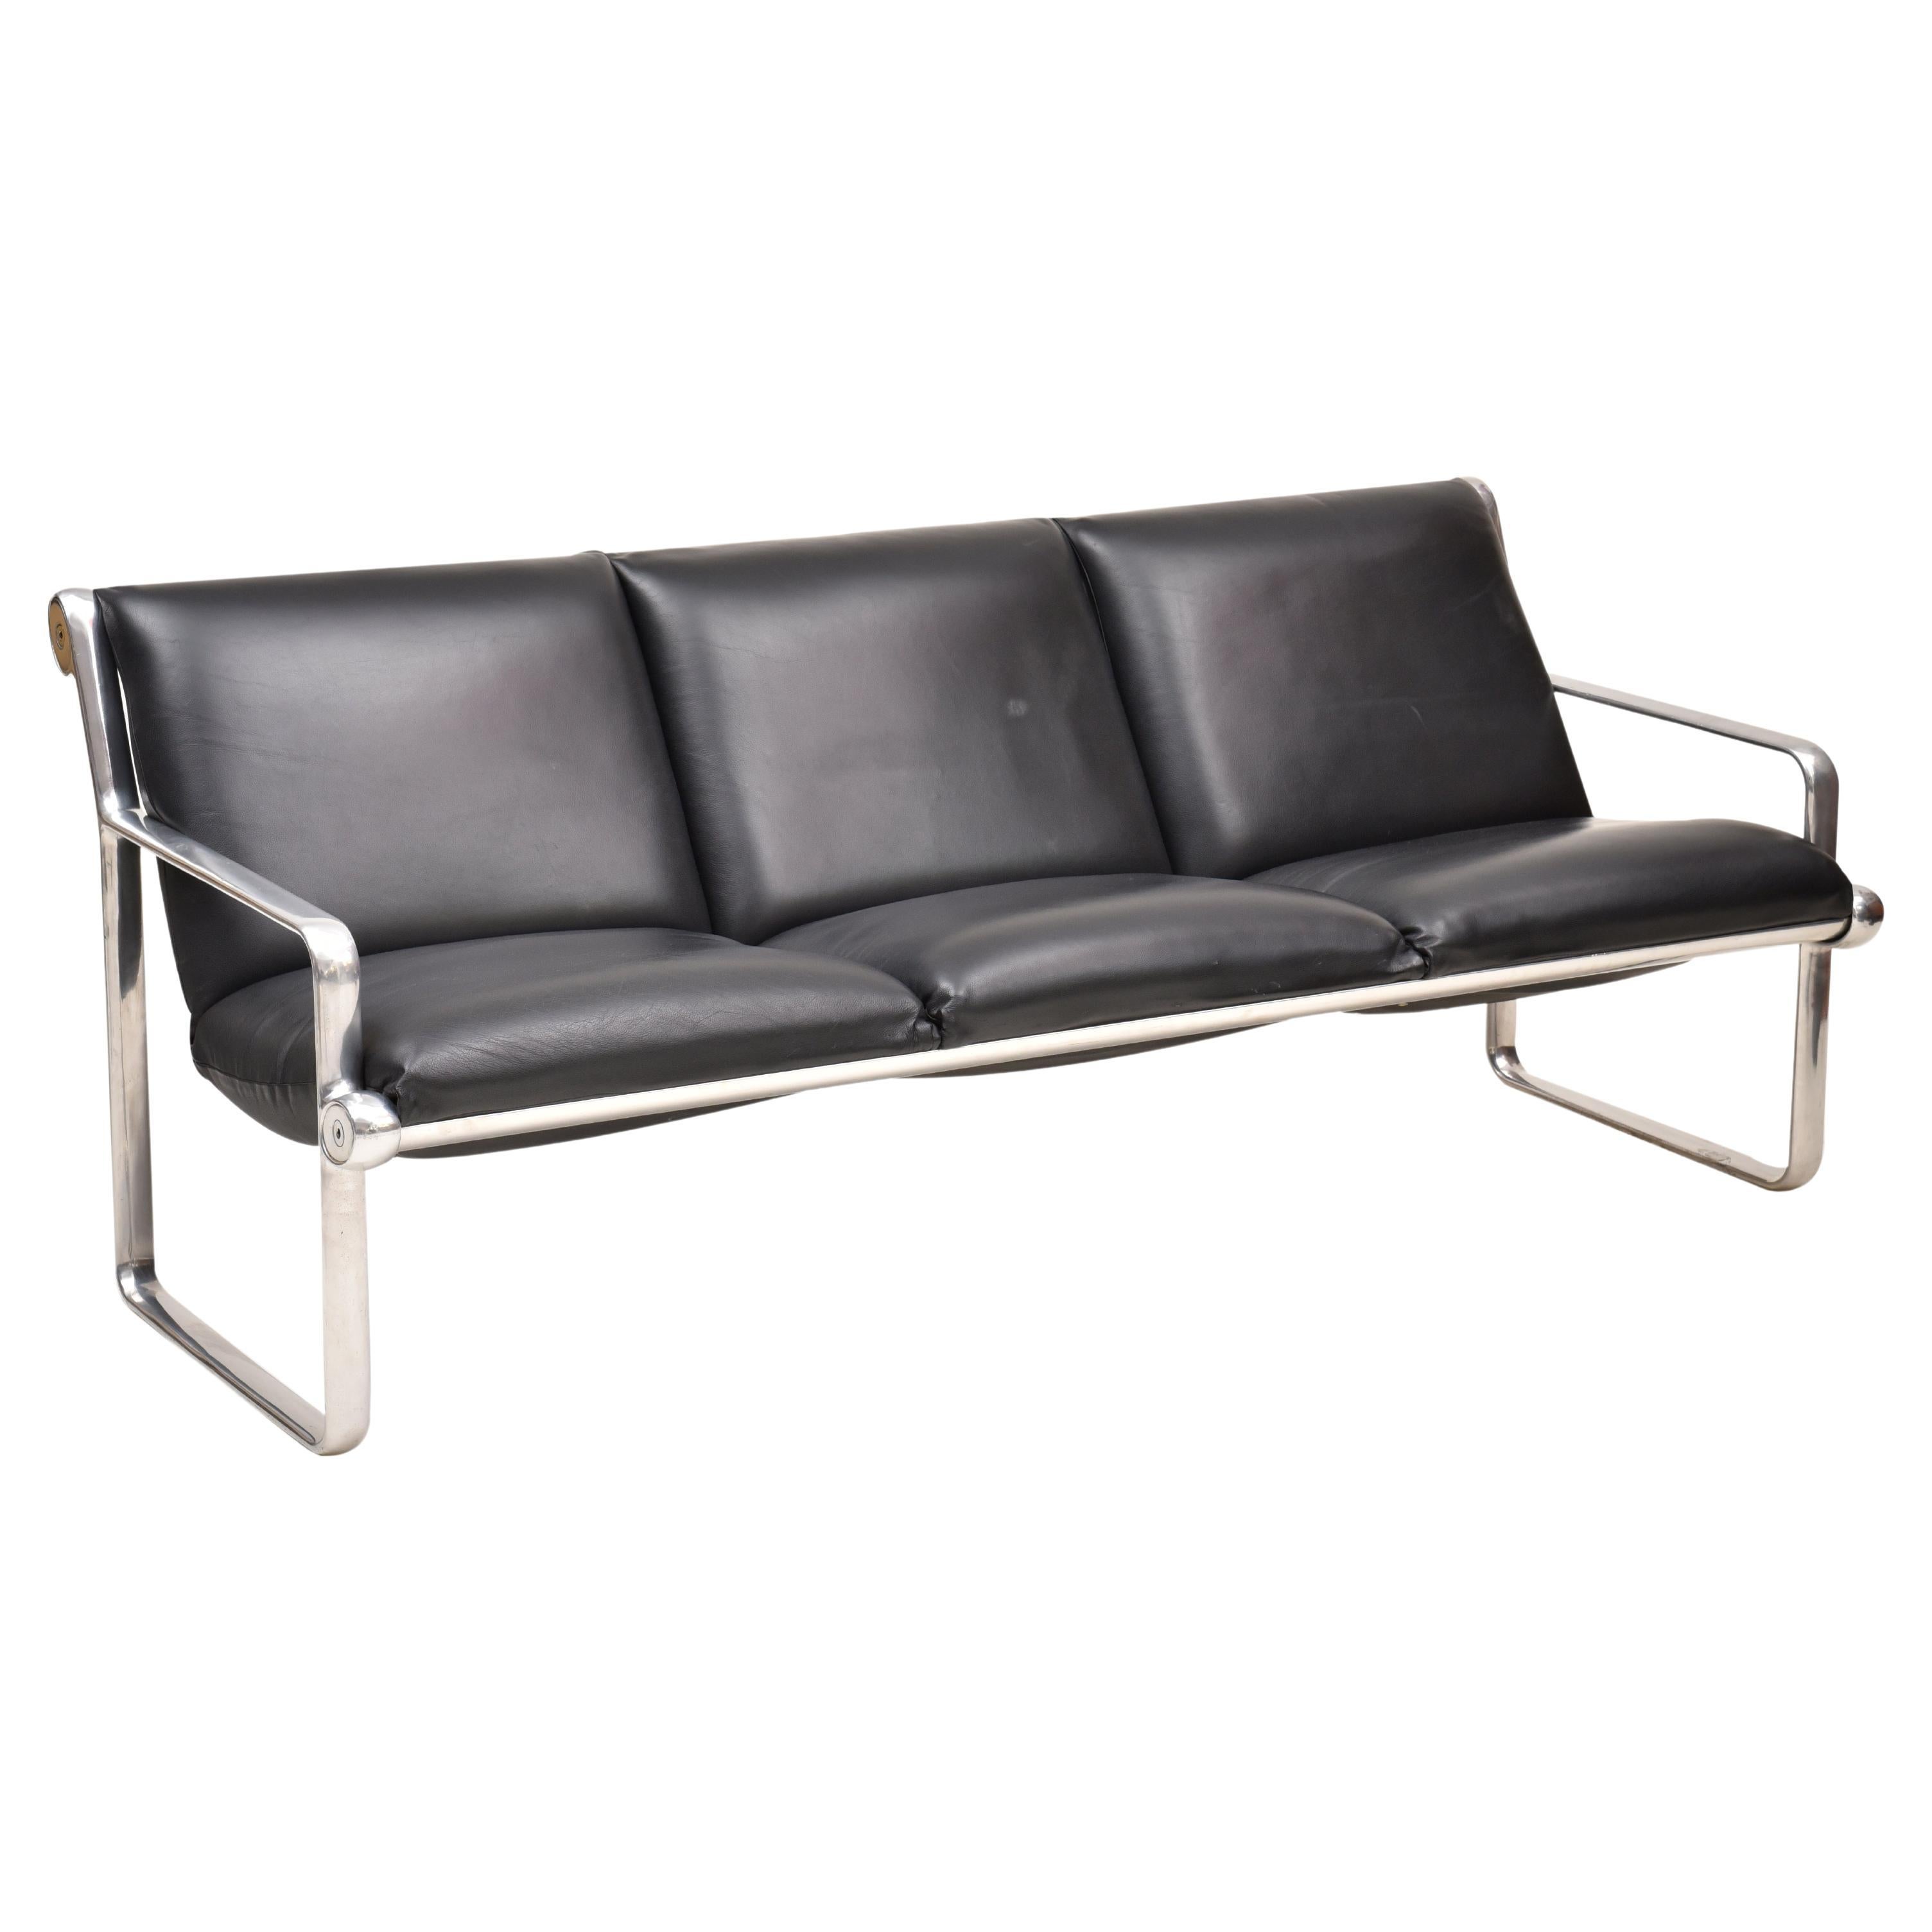 Hanna Sofa by Forma, Florence Knoll, 1975s For Sale